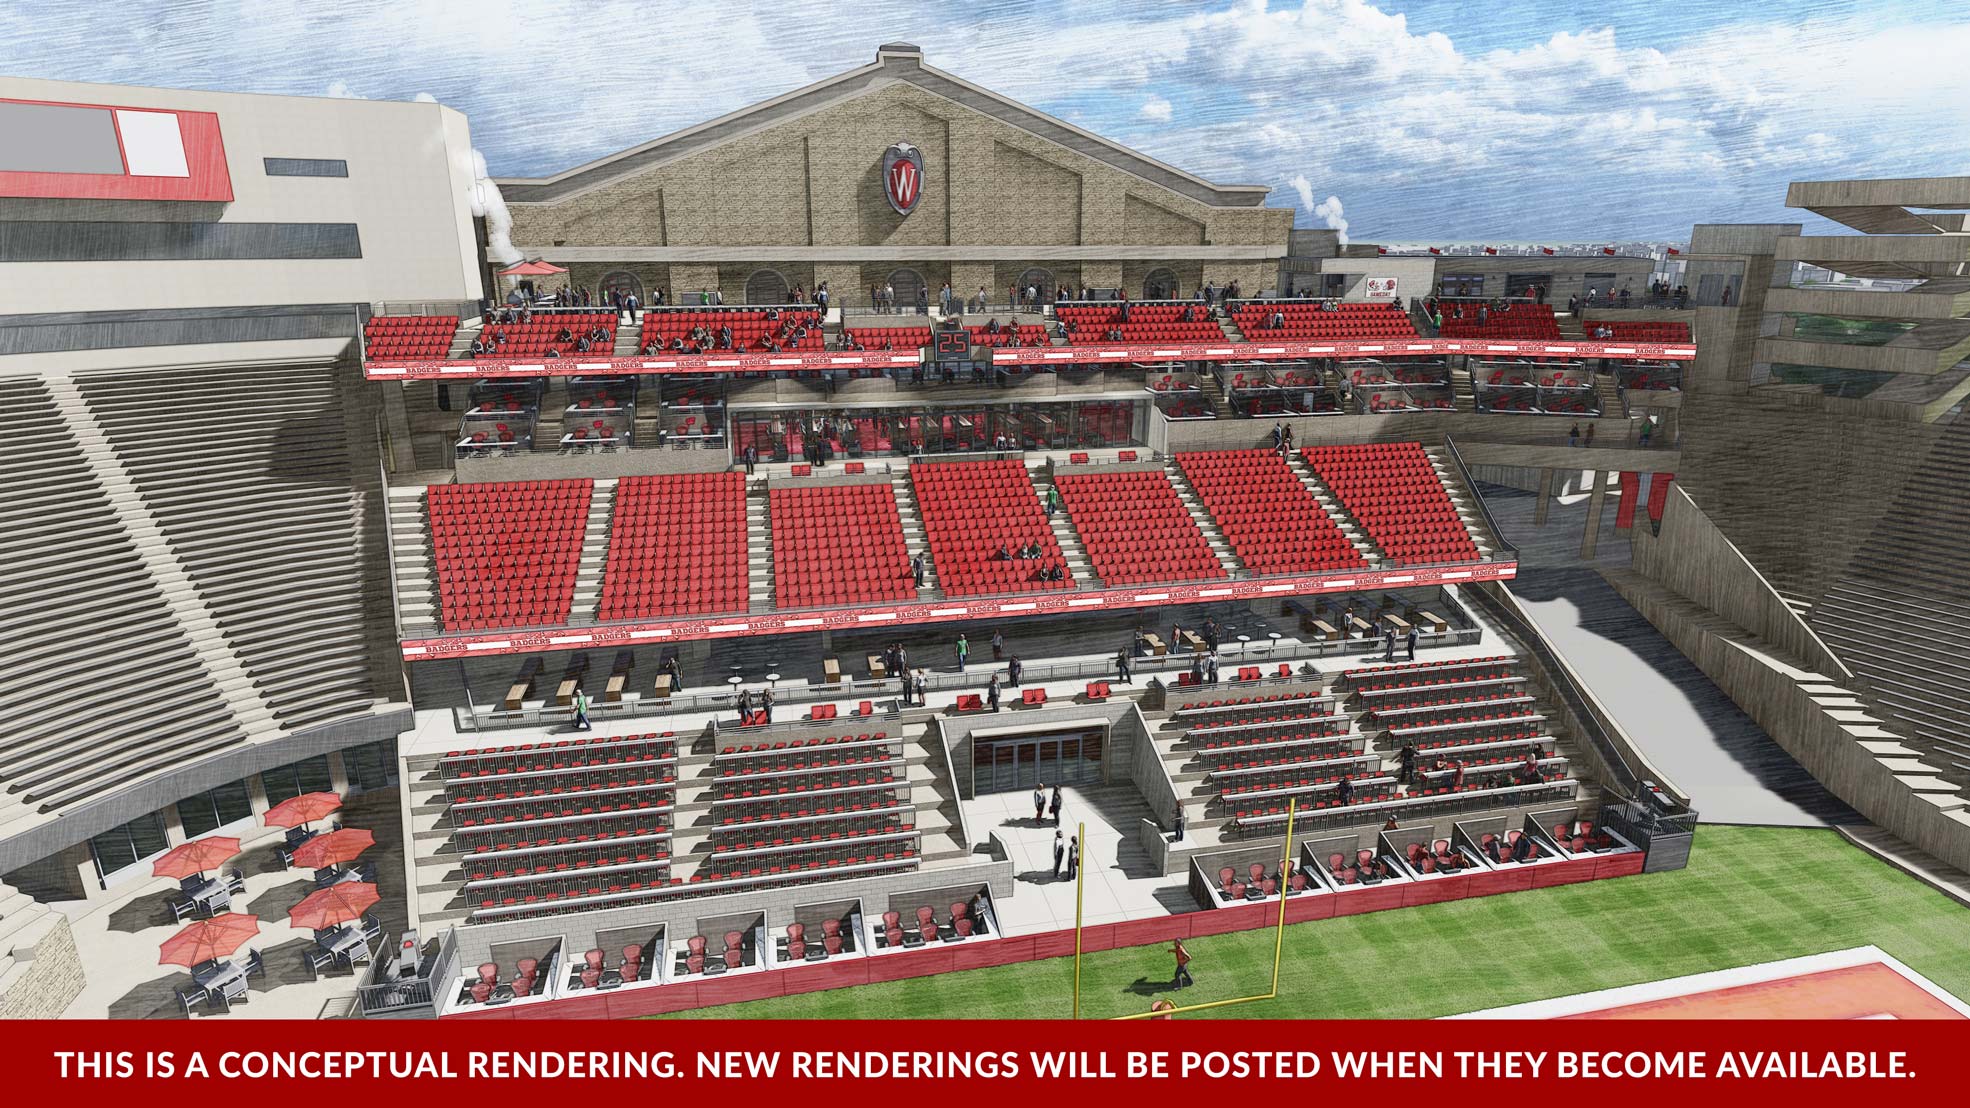 Camp Randall Stadium South End Zone Rendering From the Front Top View (as if from a plane in the air)